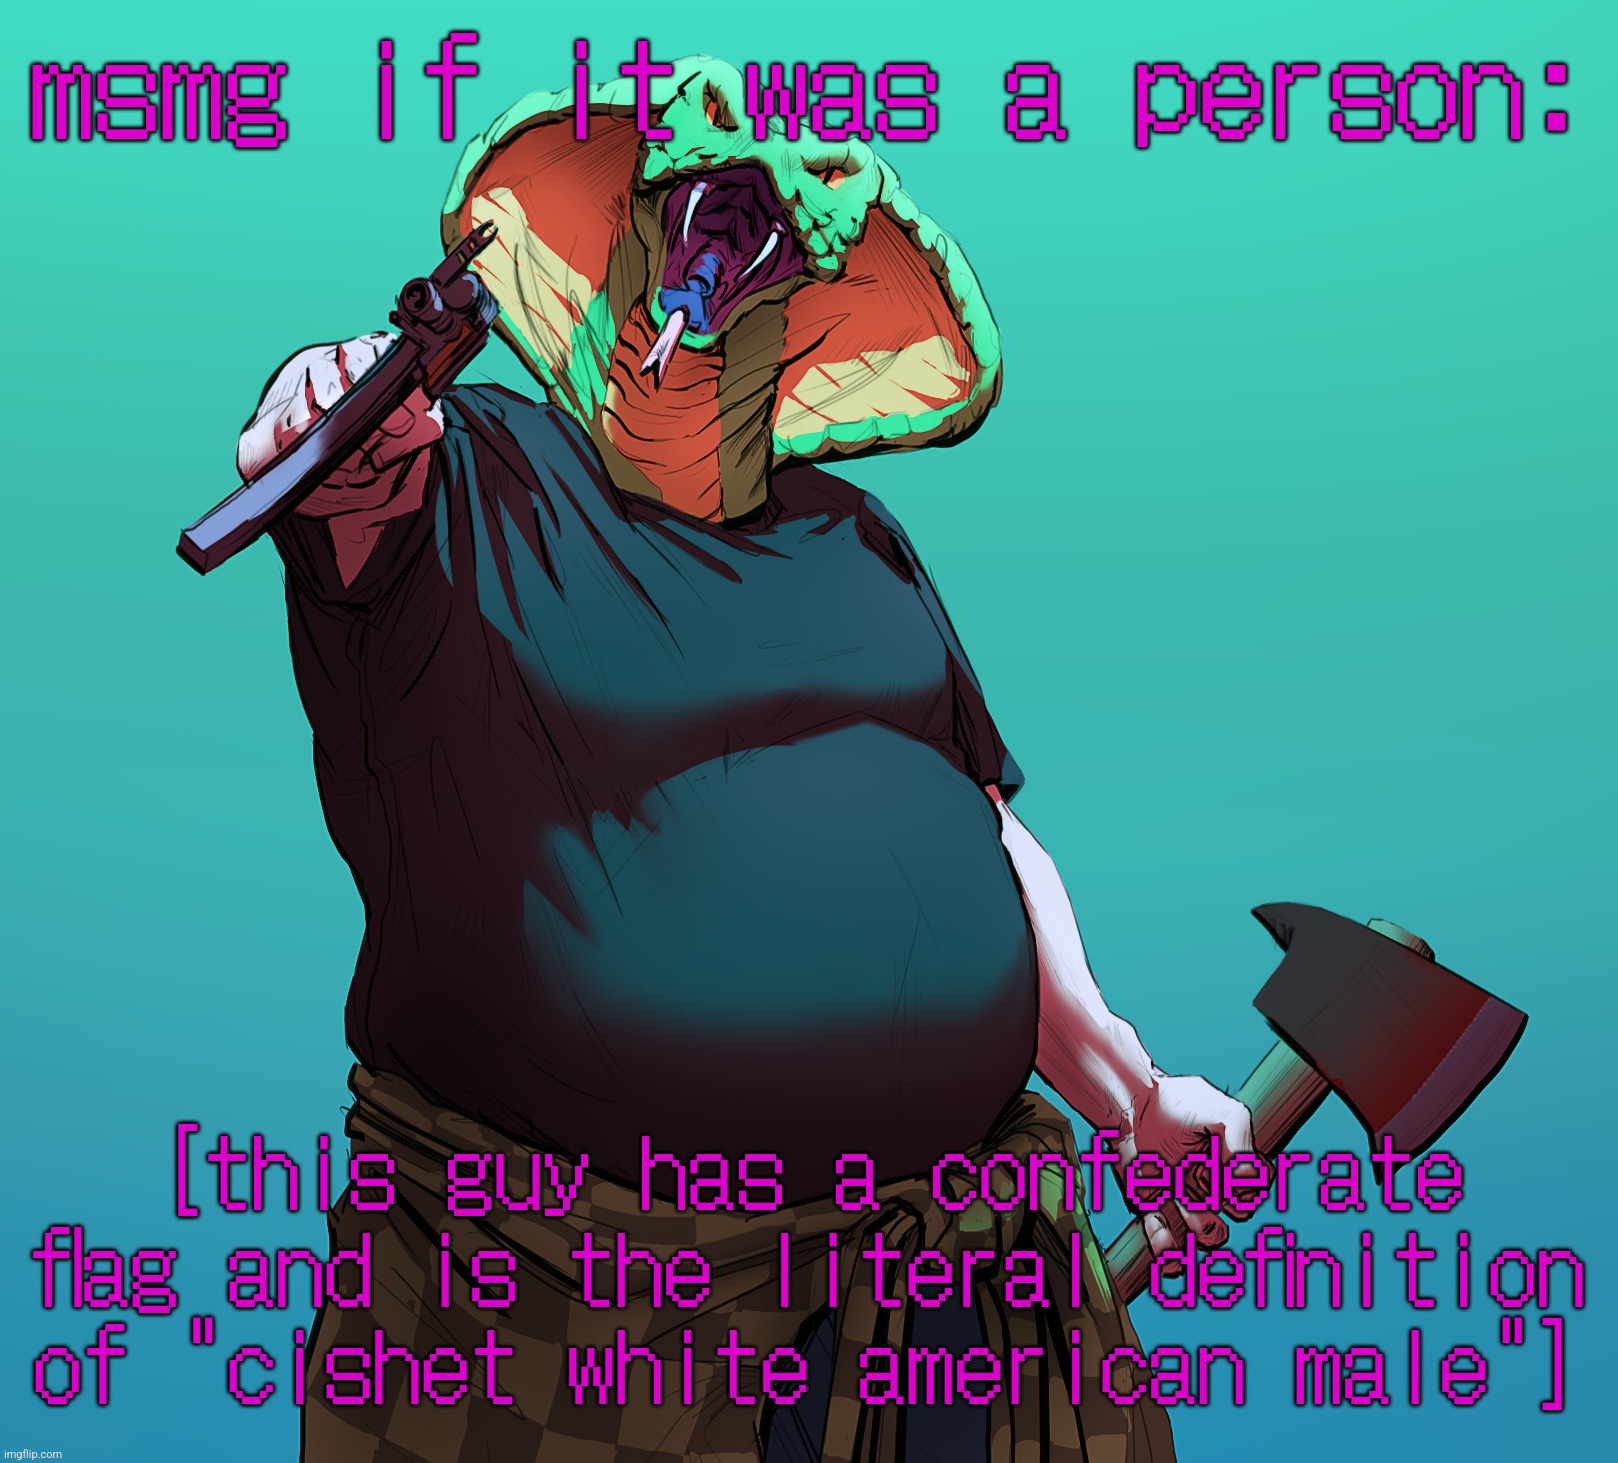 msmg if it was a person:; [this guy has a confederate flag and is the literal definition of "cishet white american male"] | made w/ Imgflip meme maker